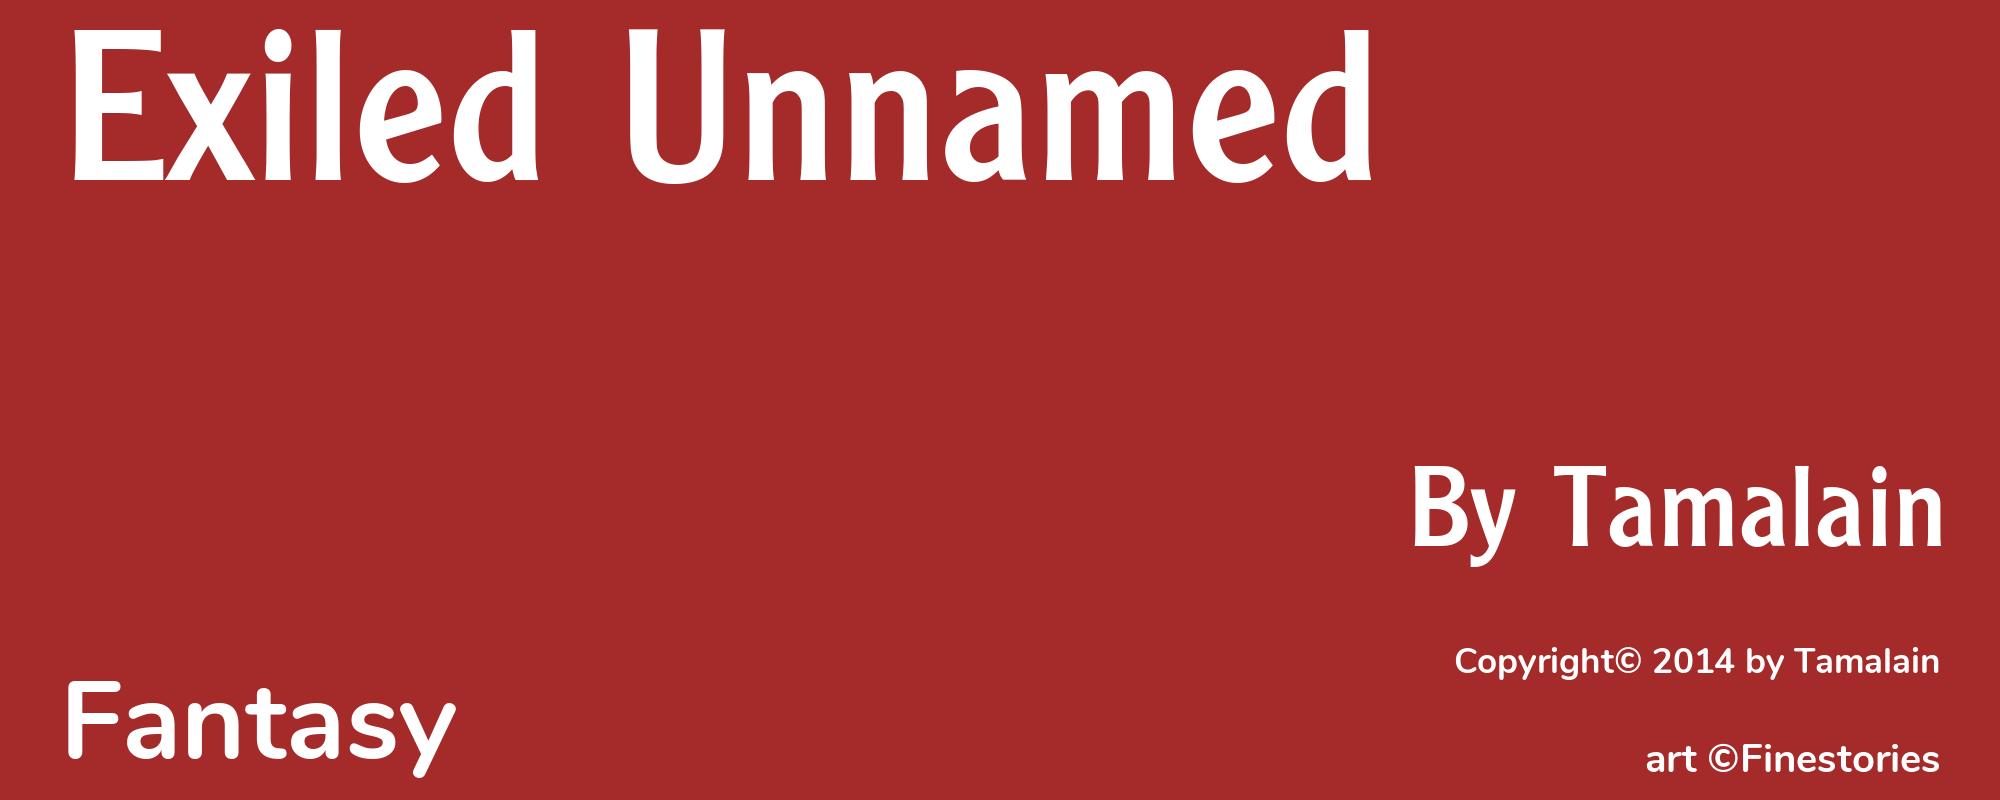 Exiled Unnamed - Cover